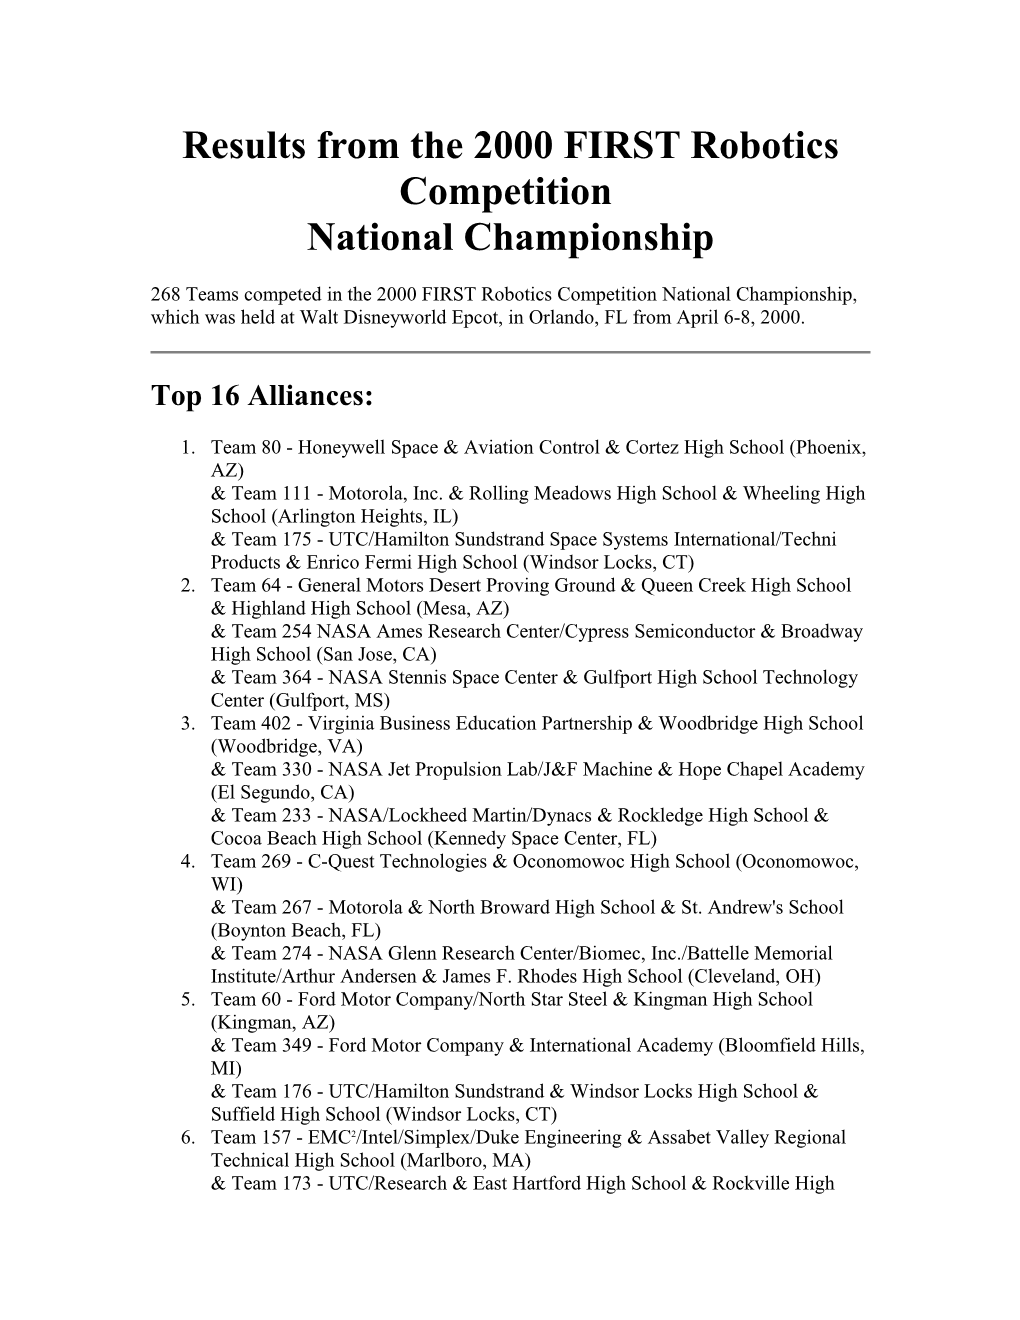 Results from the 2000 FIRST Robotics Competition